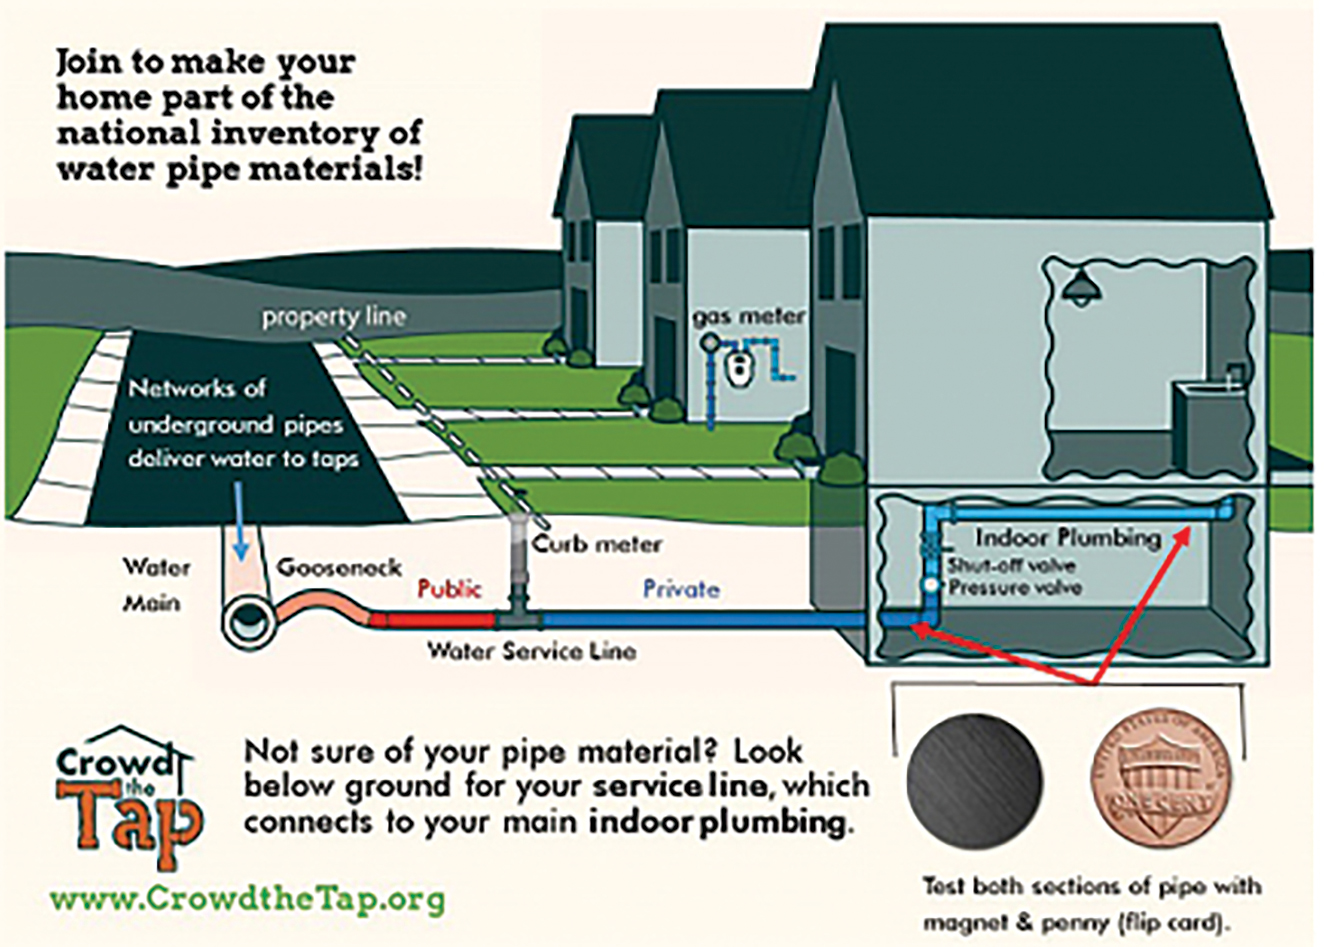 Public and private water service lines